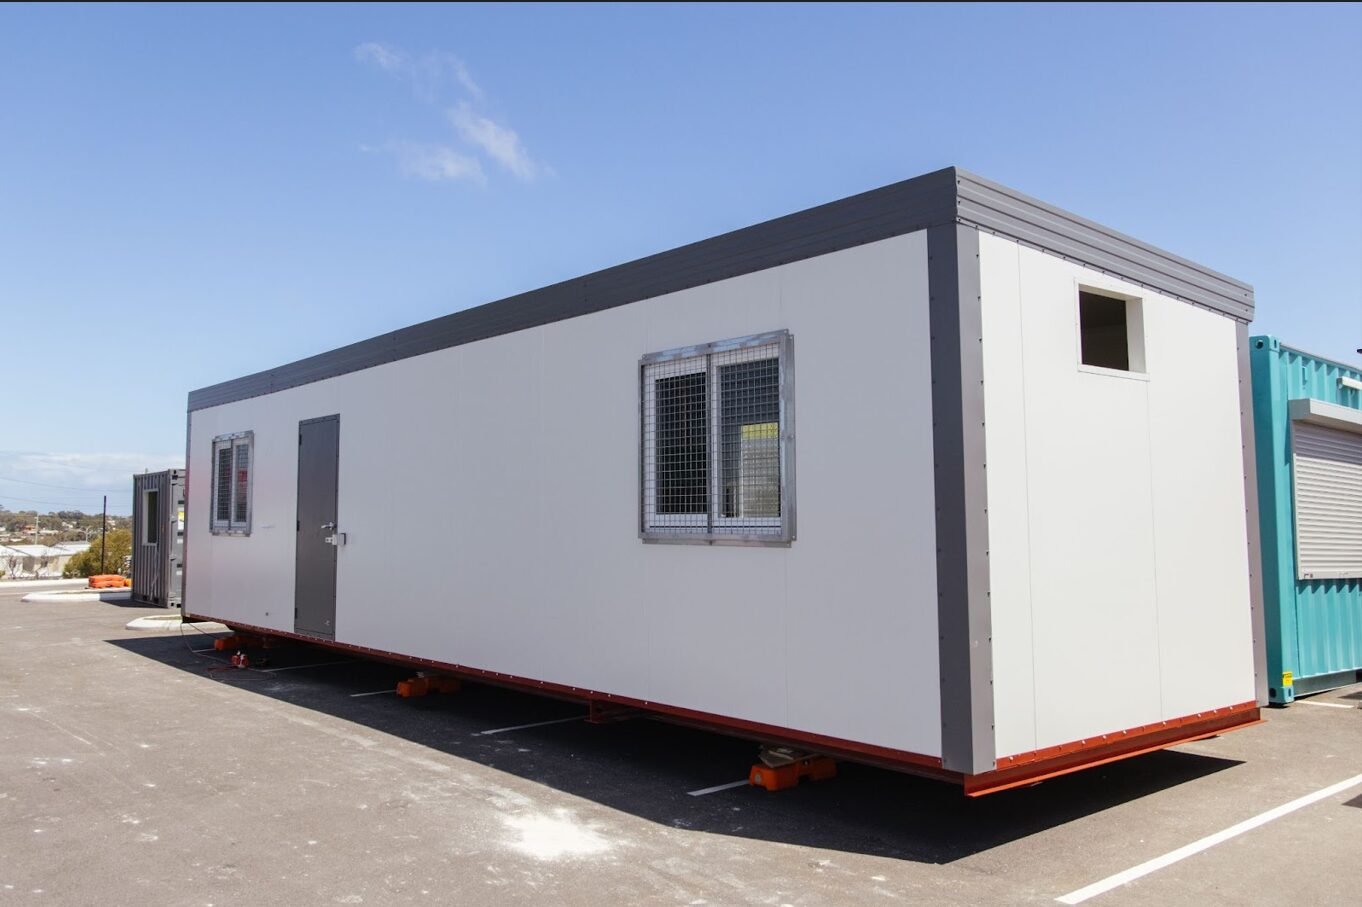 Long portable office container with security window bars, situated in an outdoor lot.